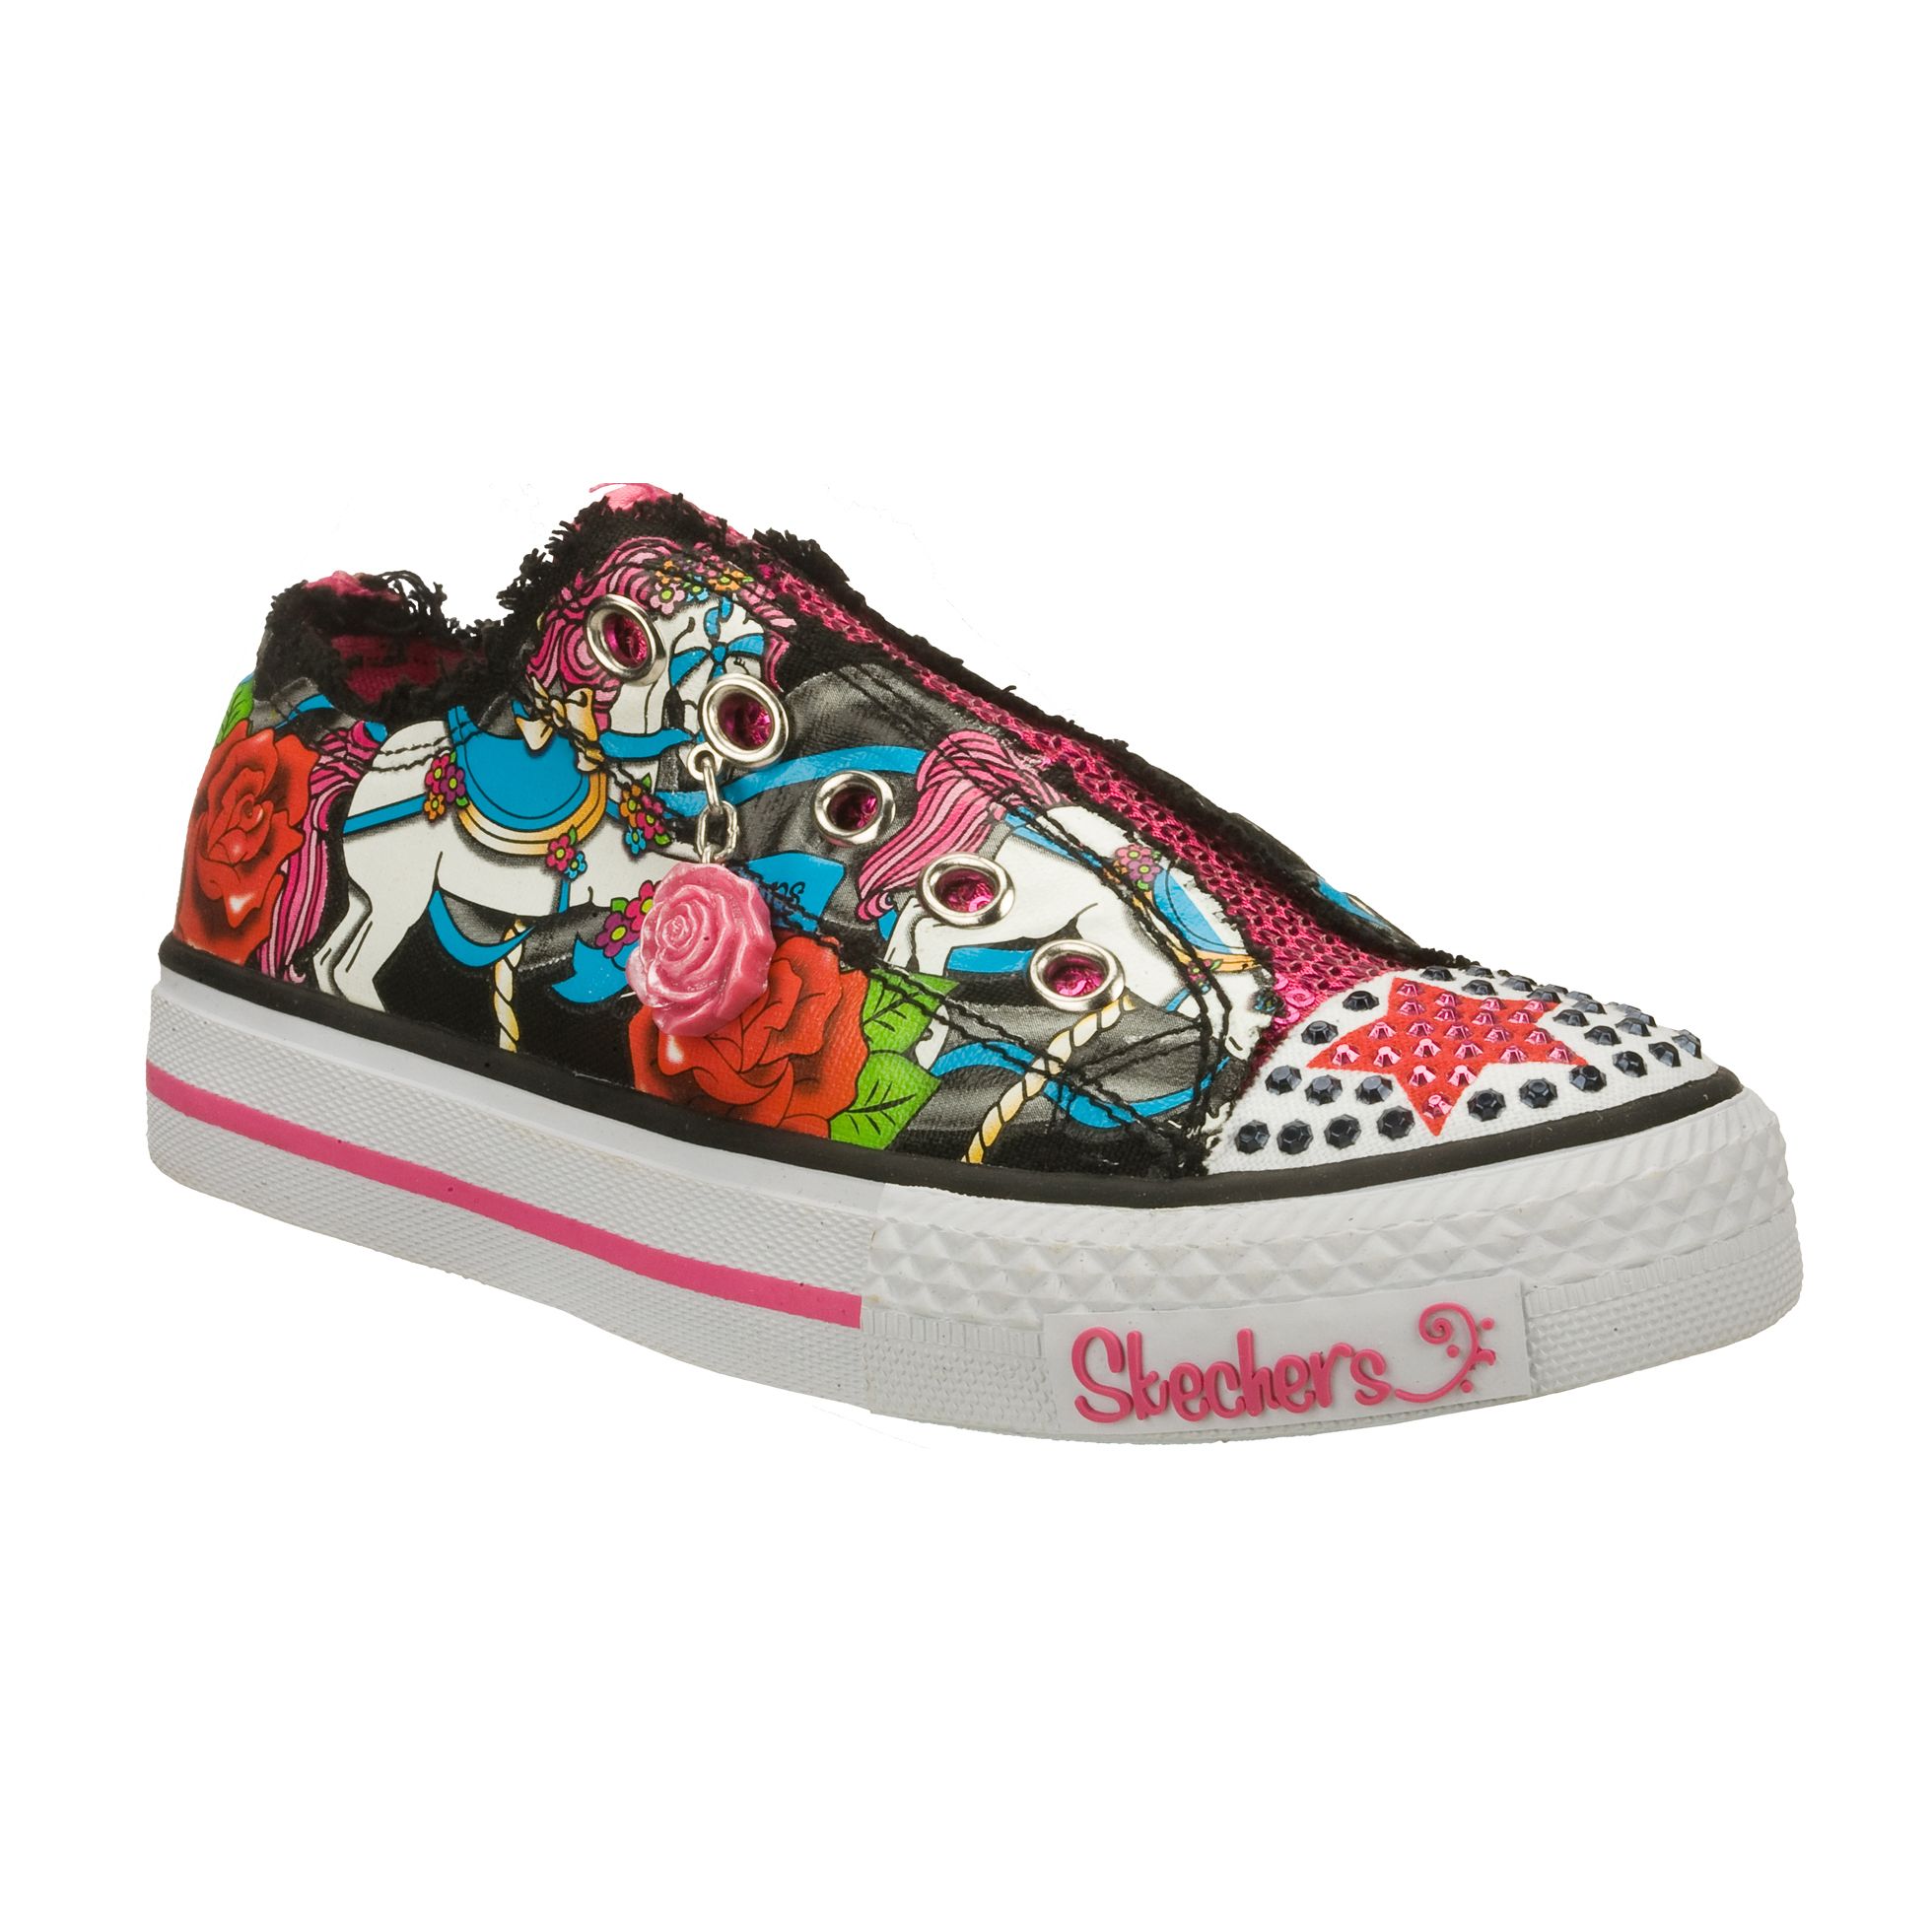 Youth Girl's Whimsical Tales Fashion Sneaker - Black/Multi